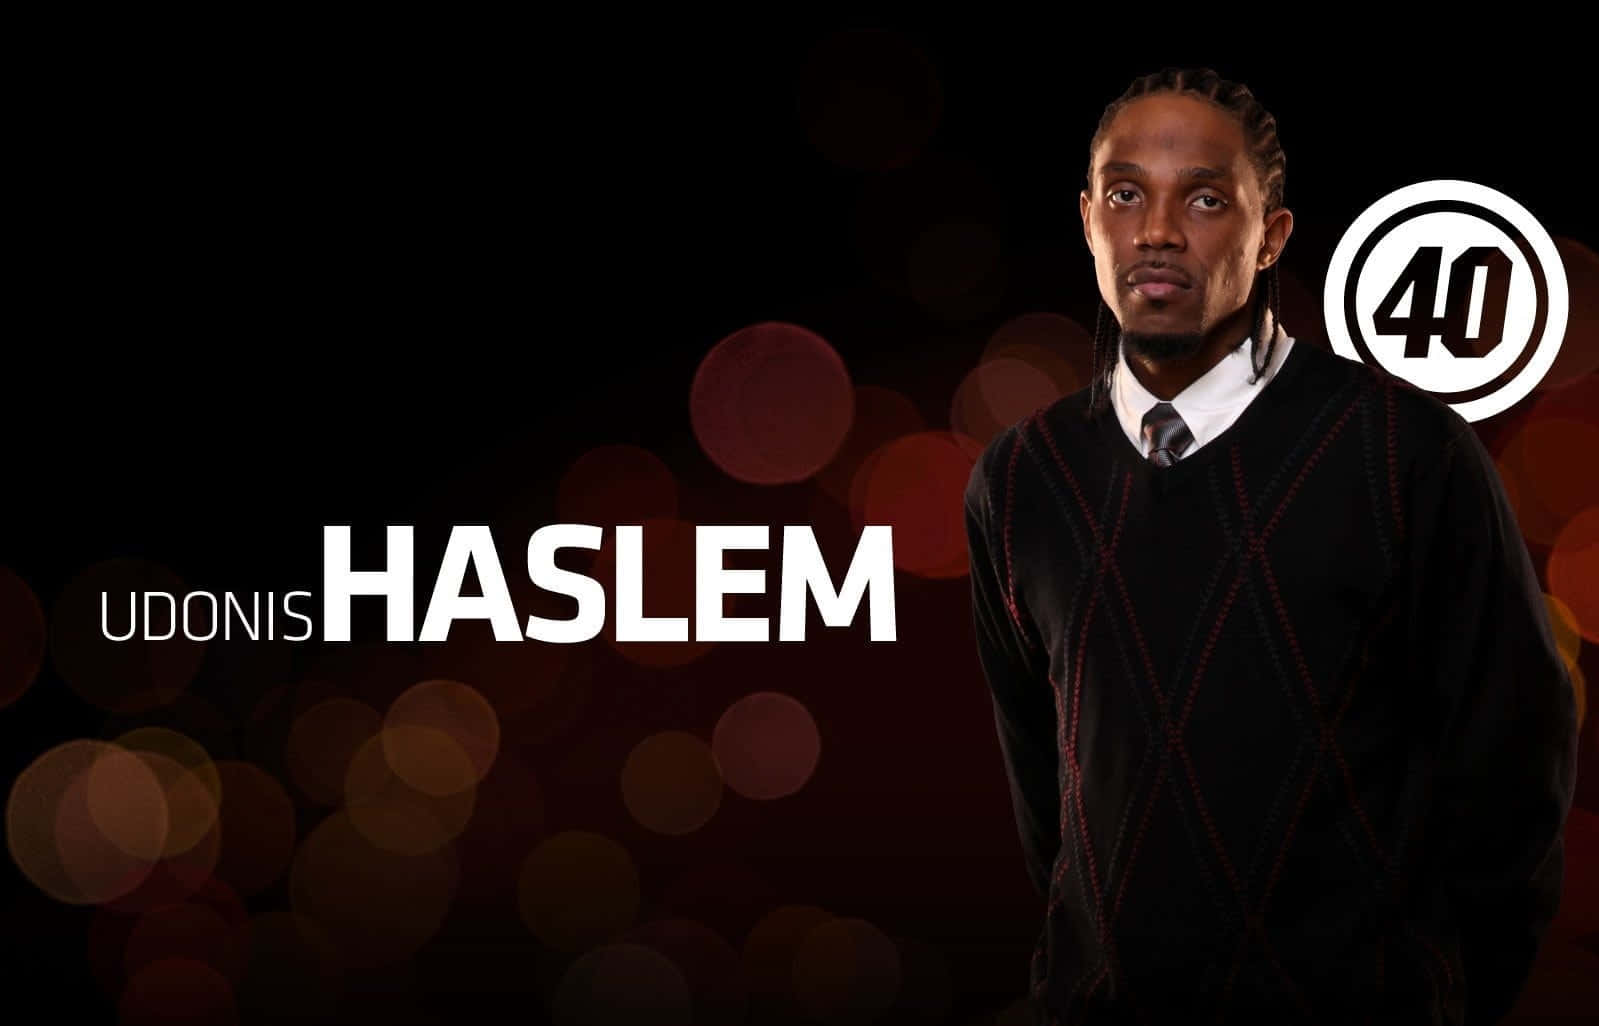 Udonis Haslem playing for the Miami Heat Wallpaper